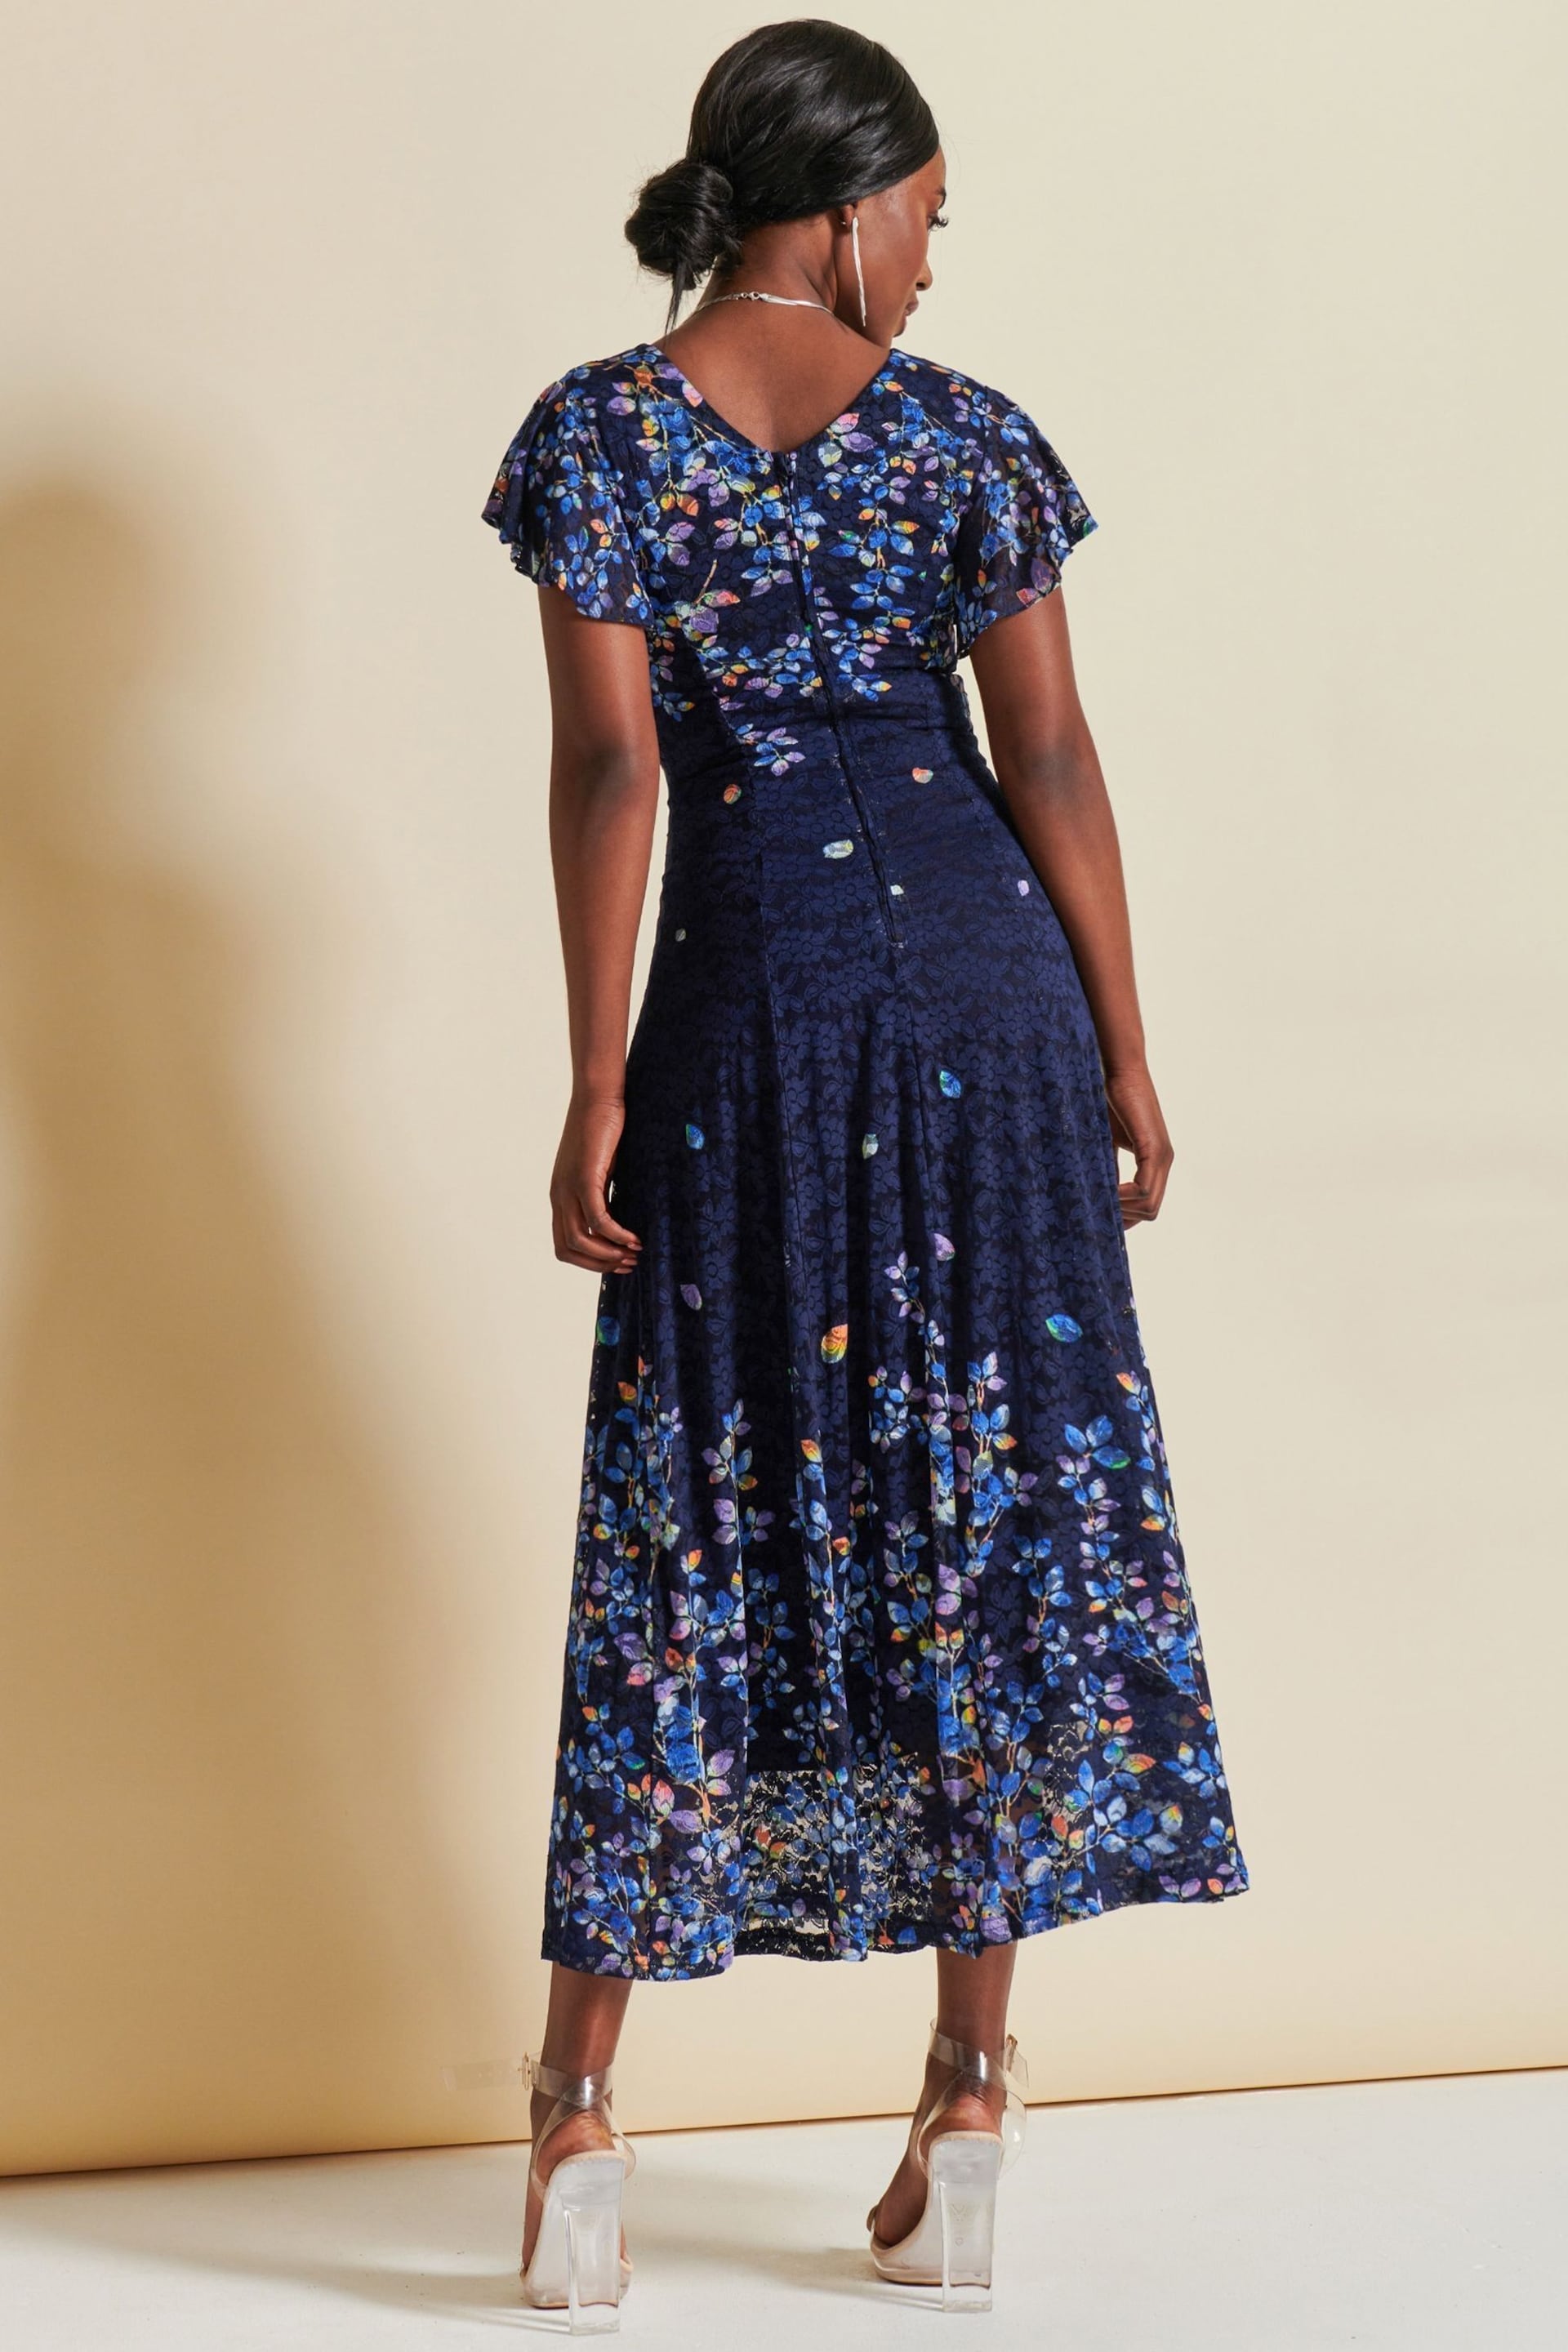 Jolie Moi Blue Mirrored Print Lace Maxi Dress - Image 3 of 7